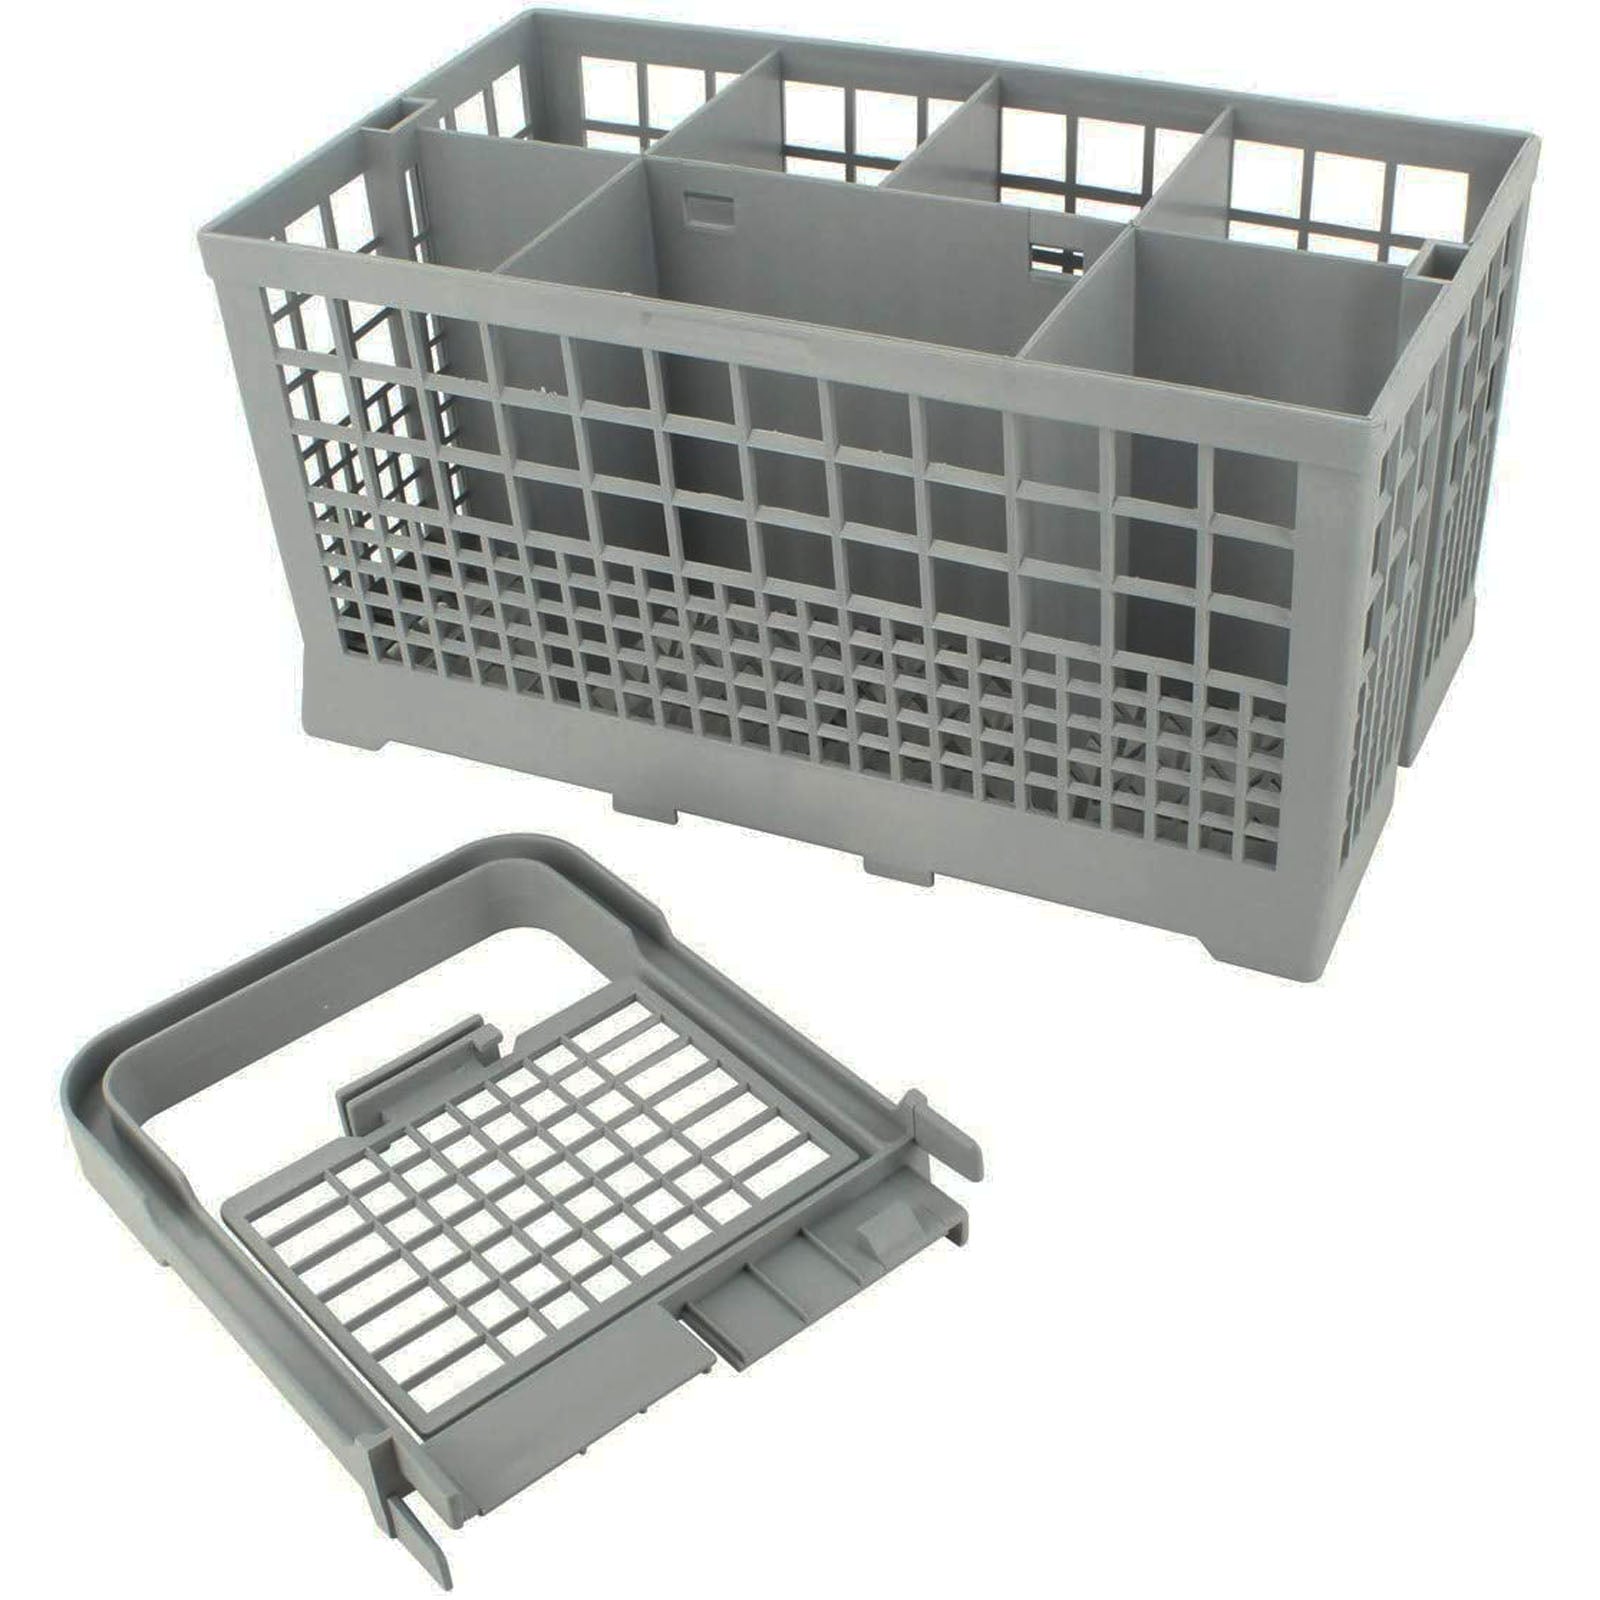 UNIVERSAL Dishwasher Cutlery Basket Cage with Detachable Handle